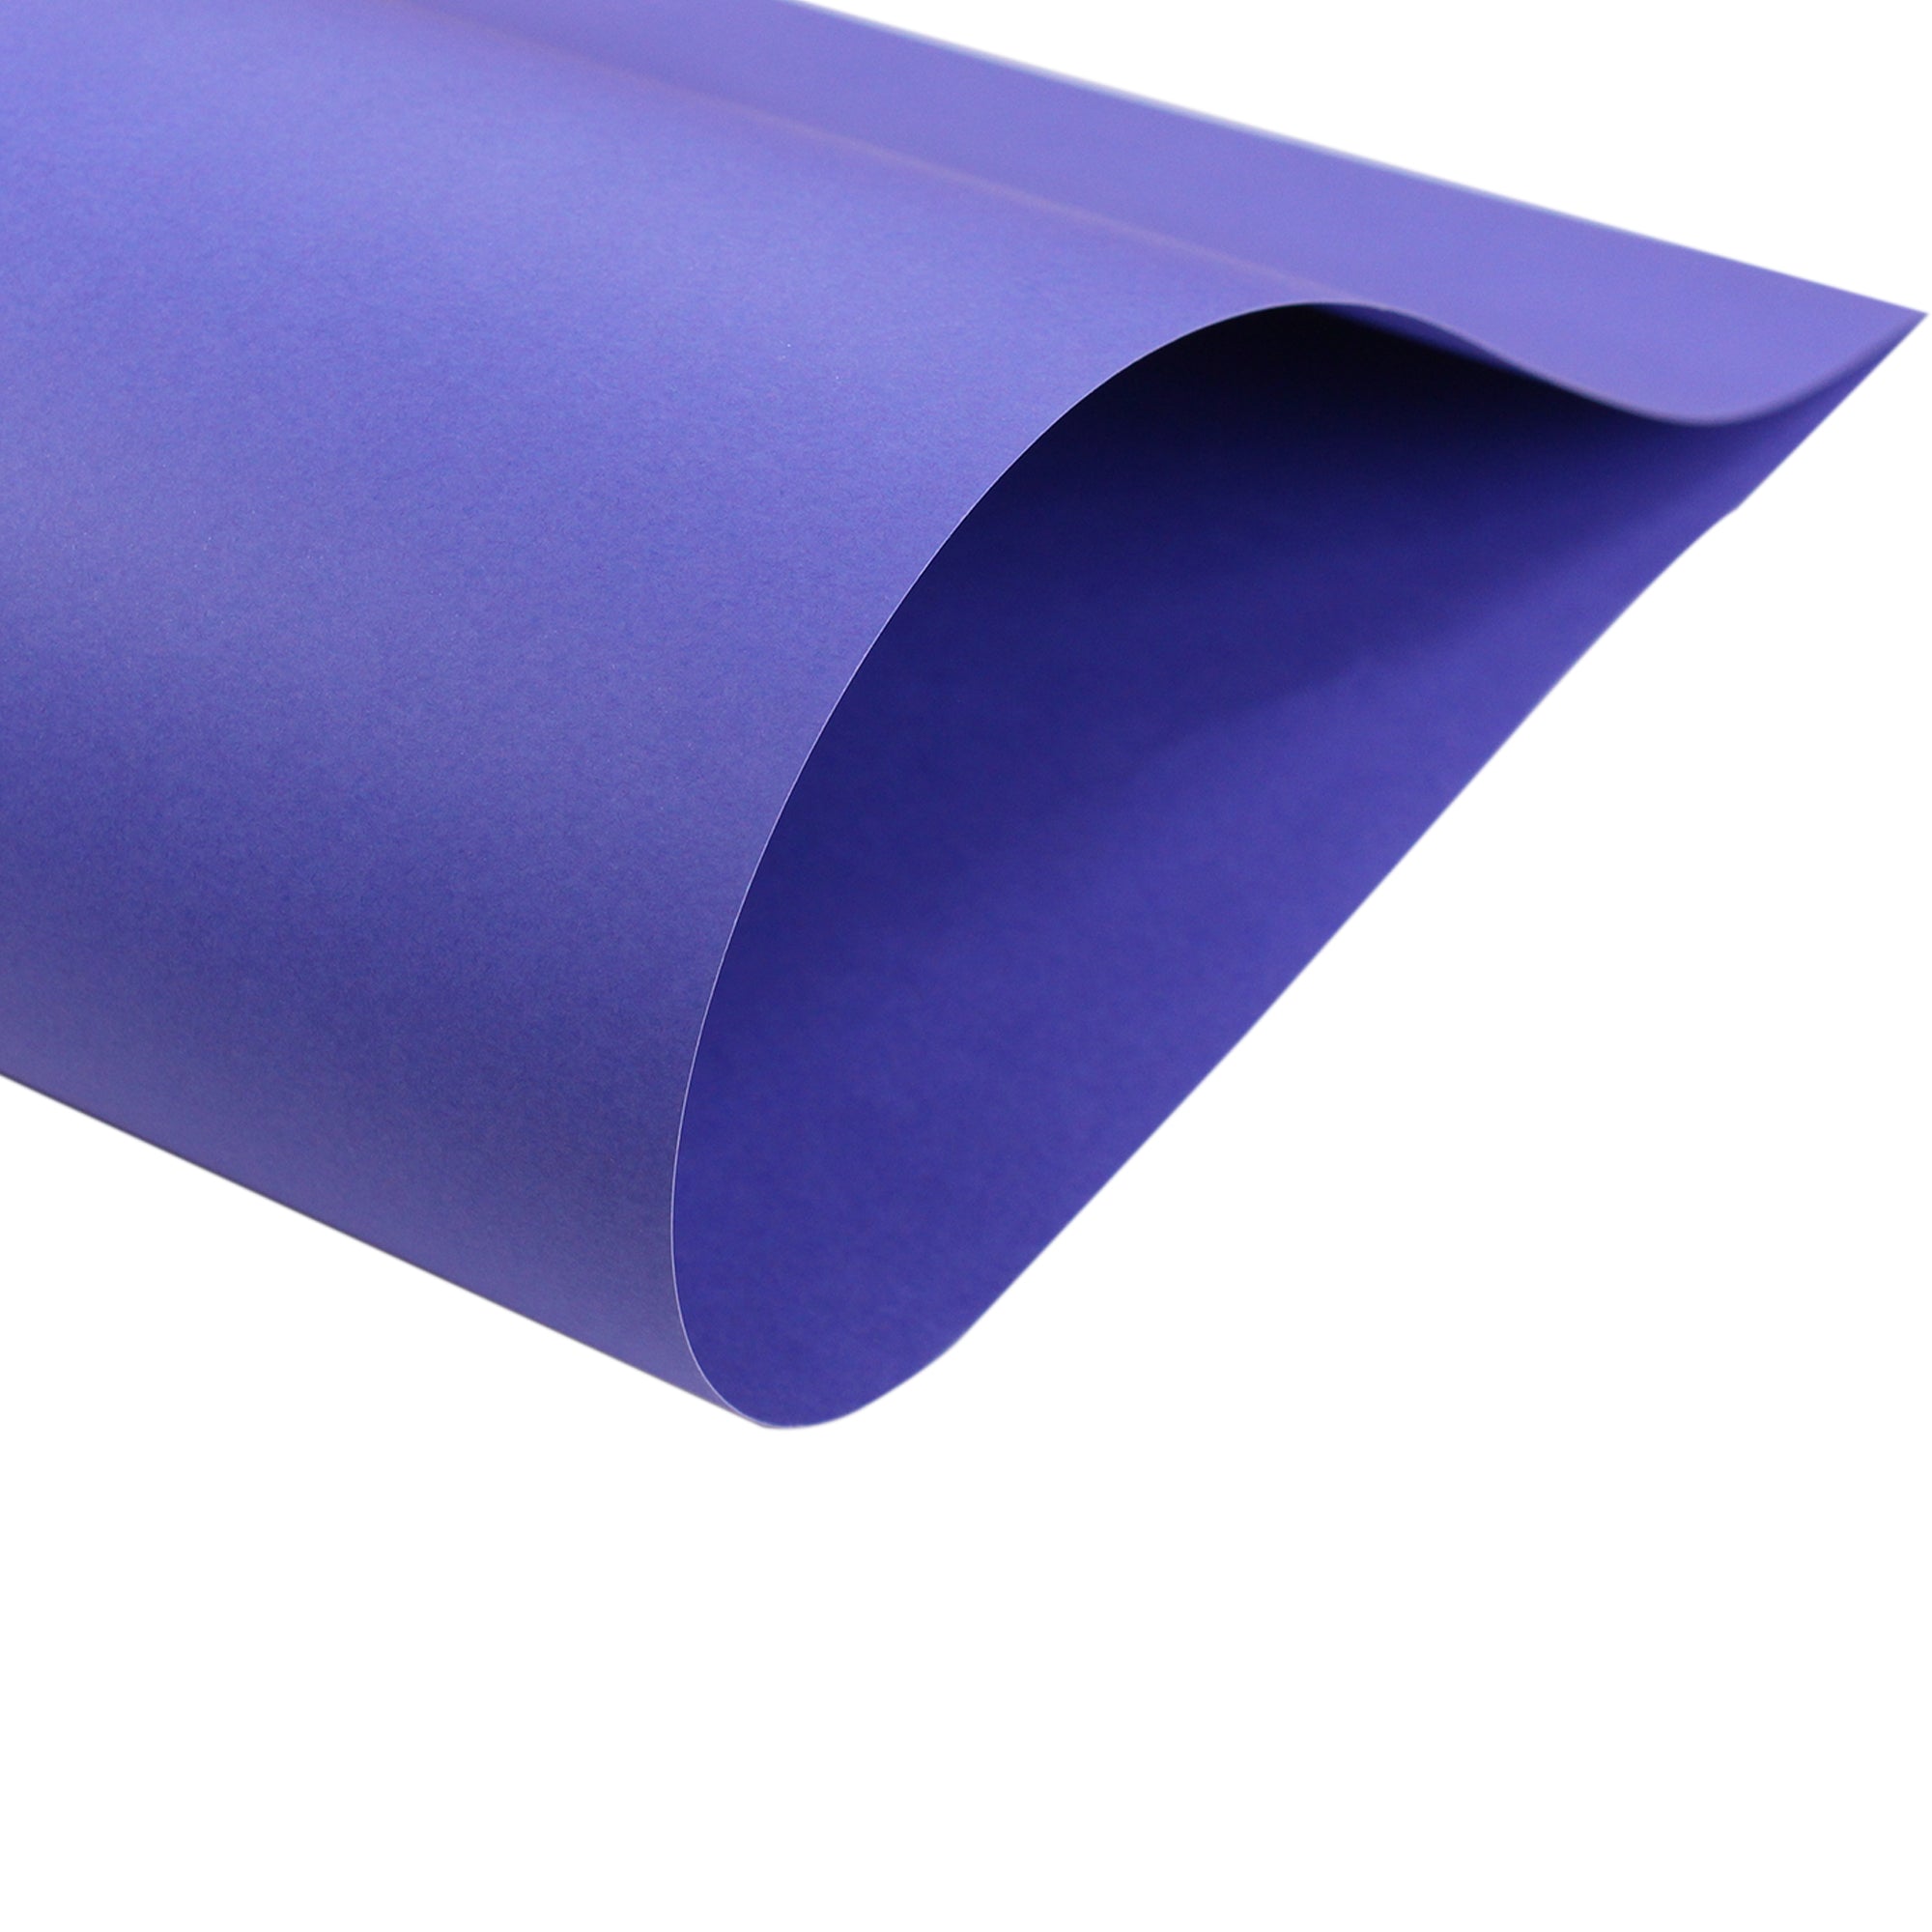 Card Stock 220Gsm 31Inch X 21Inch Violet 1Sheet Lb